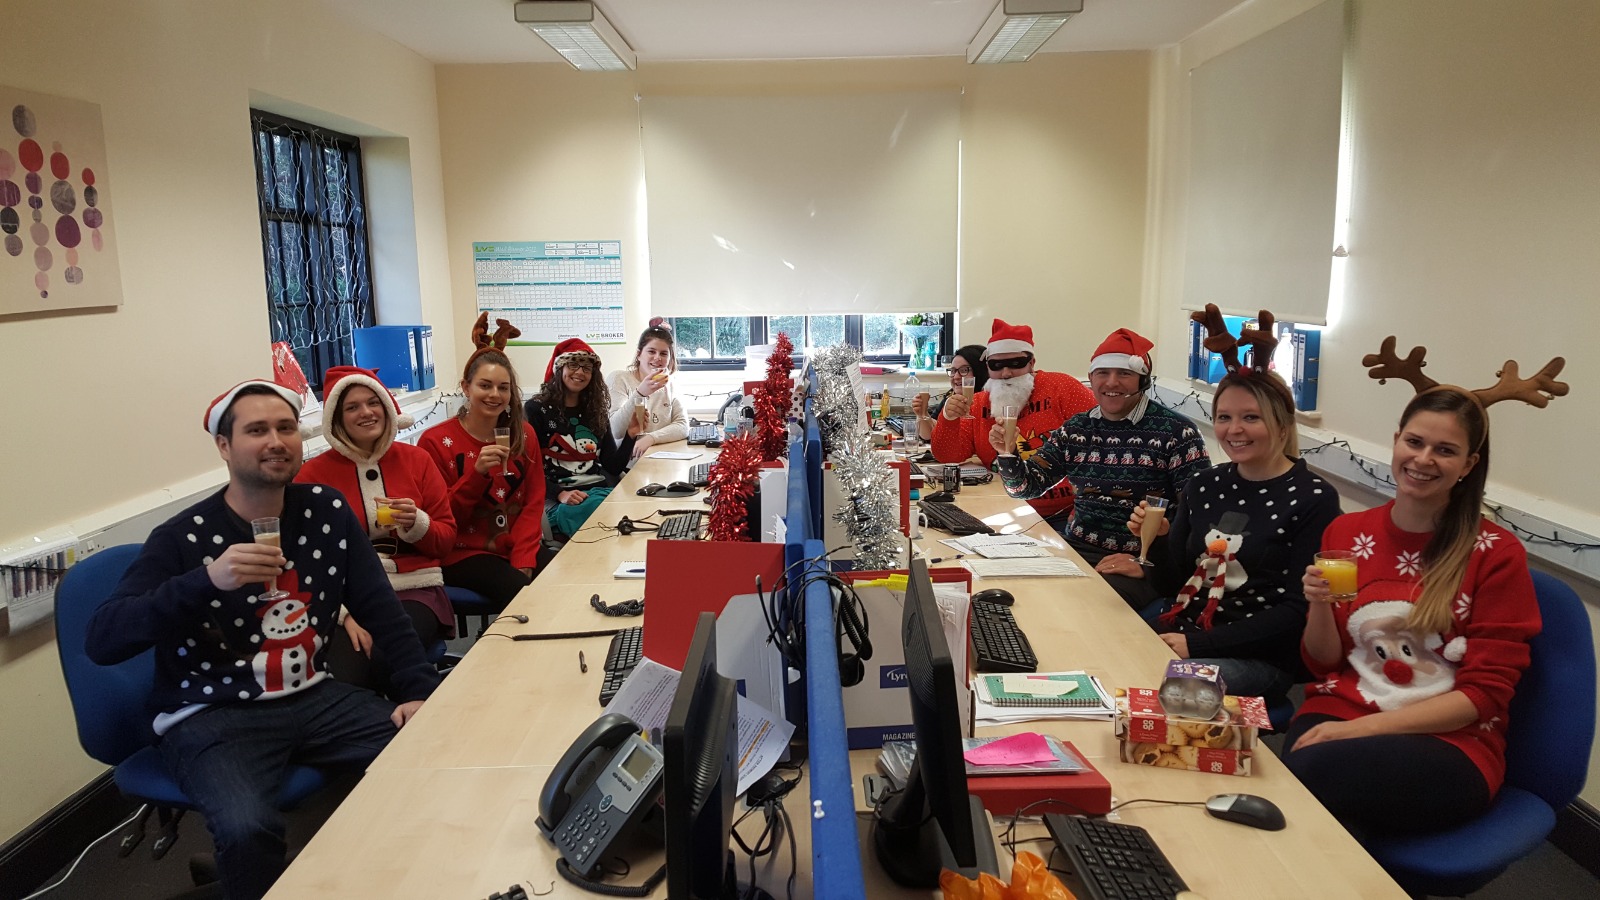 MyInsurance employees in their office at Christmas